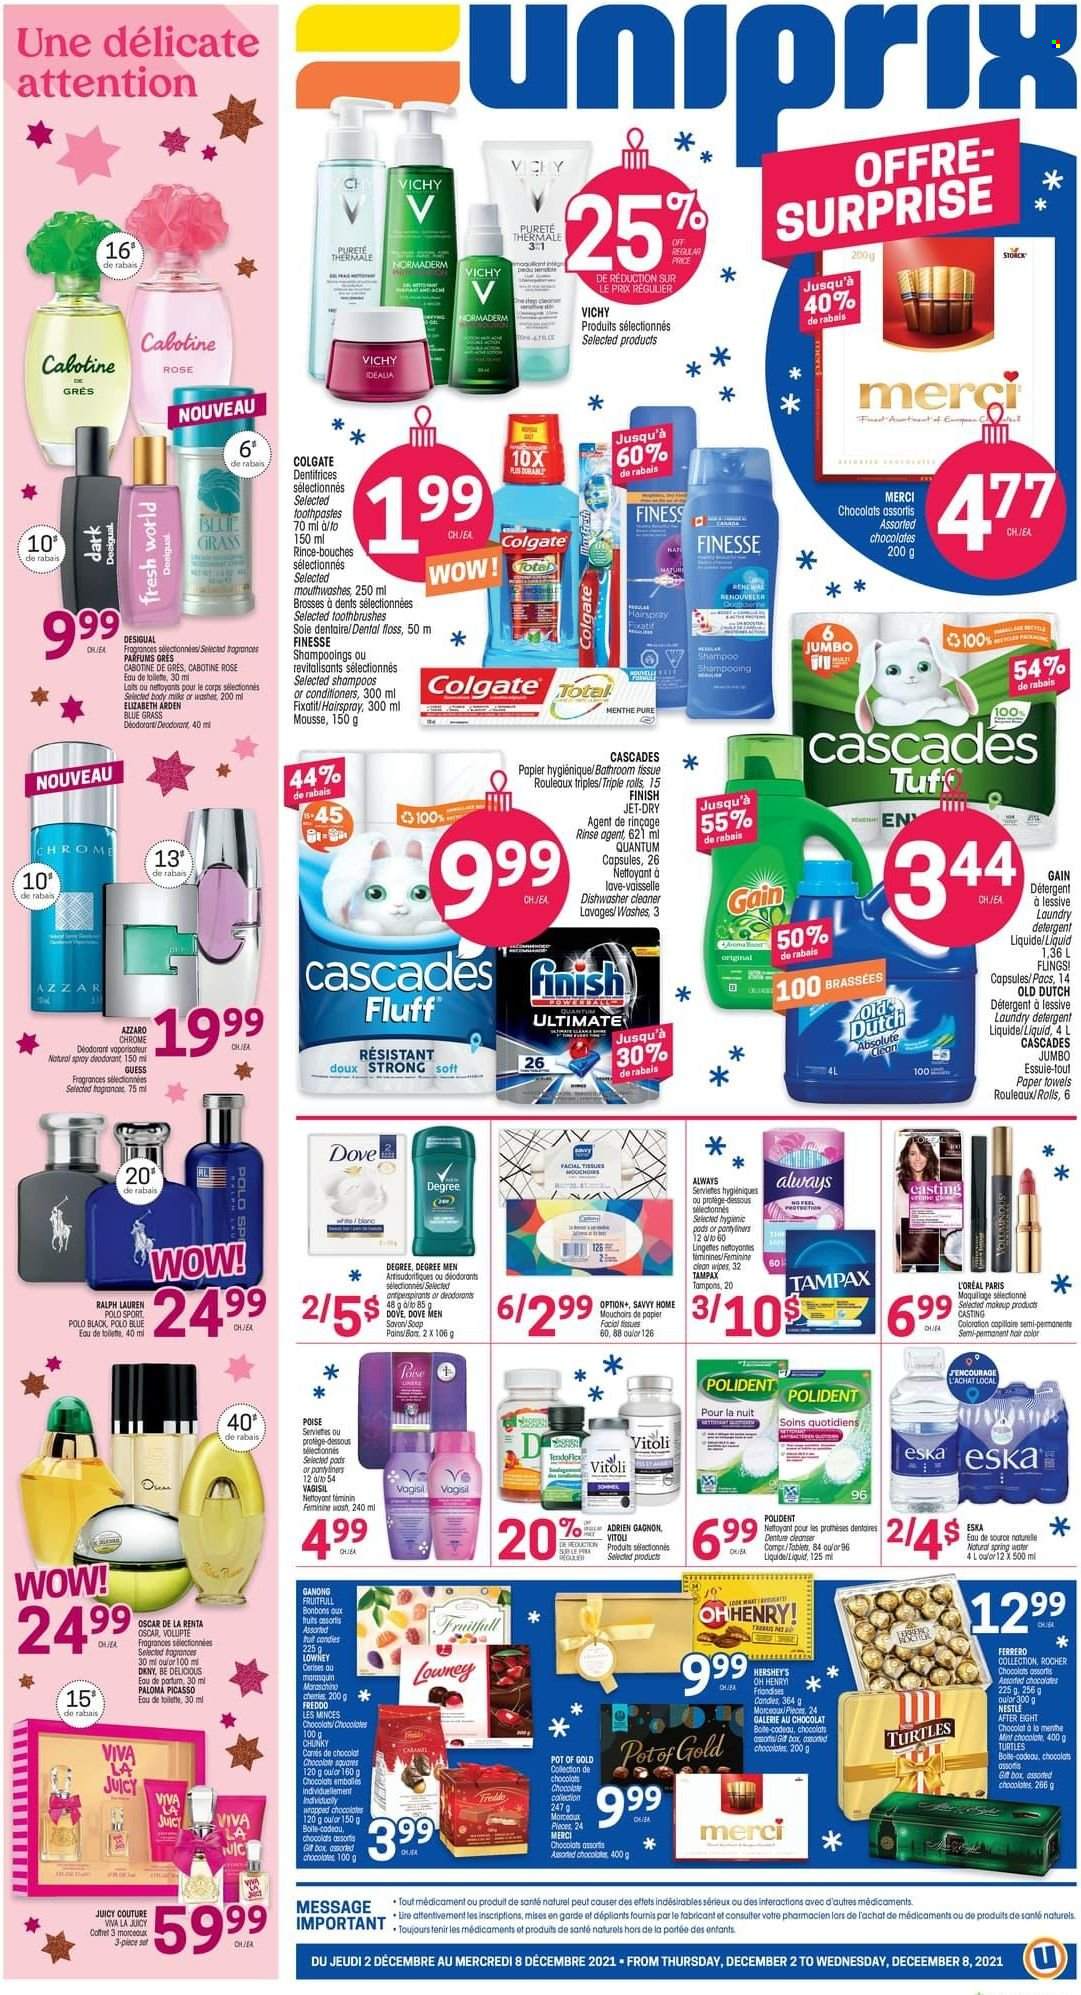 thumbnail - Uniprix Flyer - December 02, 2021 - December 08, 2021 - Sales products - chocolate, Hershey's, After Eight, Merci, spring water, wipes, bath tissue, kitchen towels, paper towels, Gain, cleaner, laundry detergent, dishwashing liquid, dishwasher cleaner, Jet, Vichy, Polident, tampons, facial tissues, L’Oréal, hair color, DKNY, anti-perspirant, Ralph Lauren, Guess, makeup, Nestlé, detergent, Dove, Elizabeth Arden, Colgate, shampoo, Tampax, Ferrero Rocher, deodorant. Page 1.